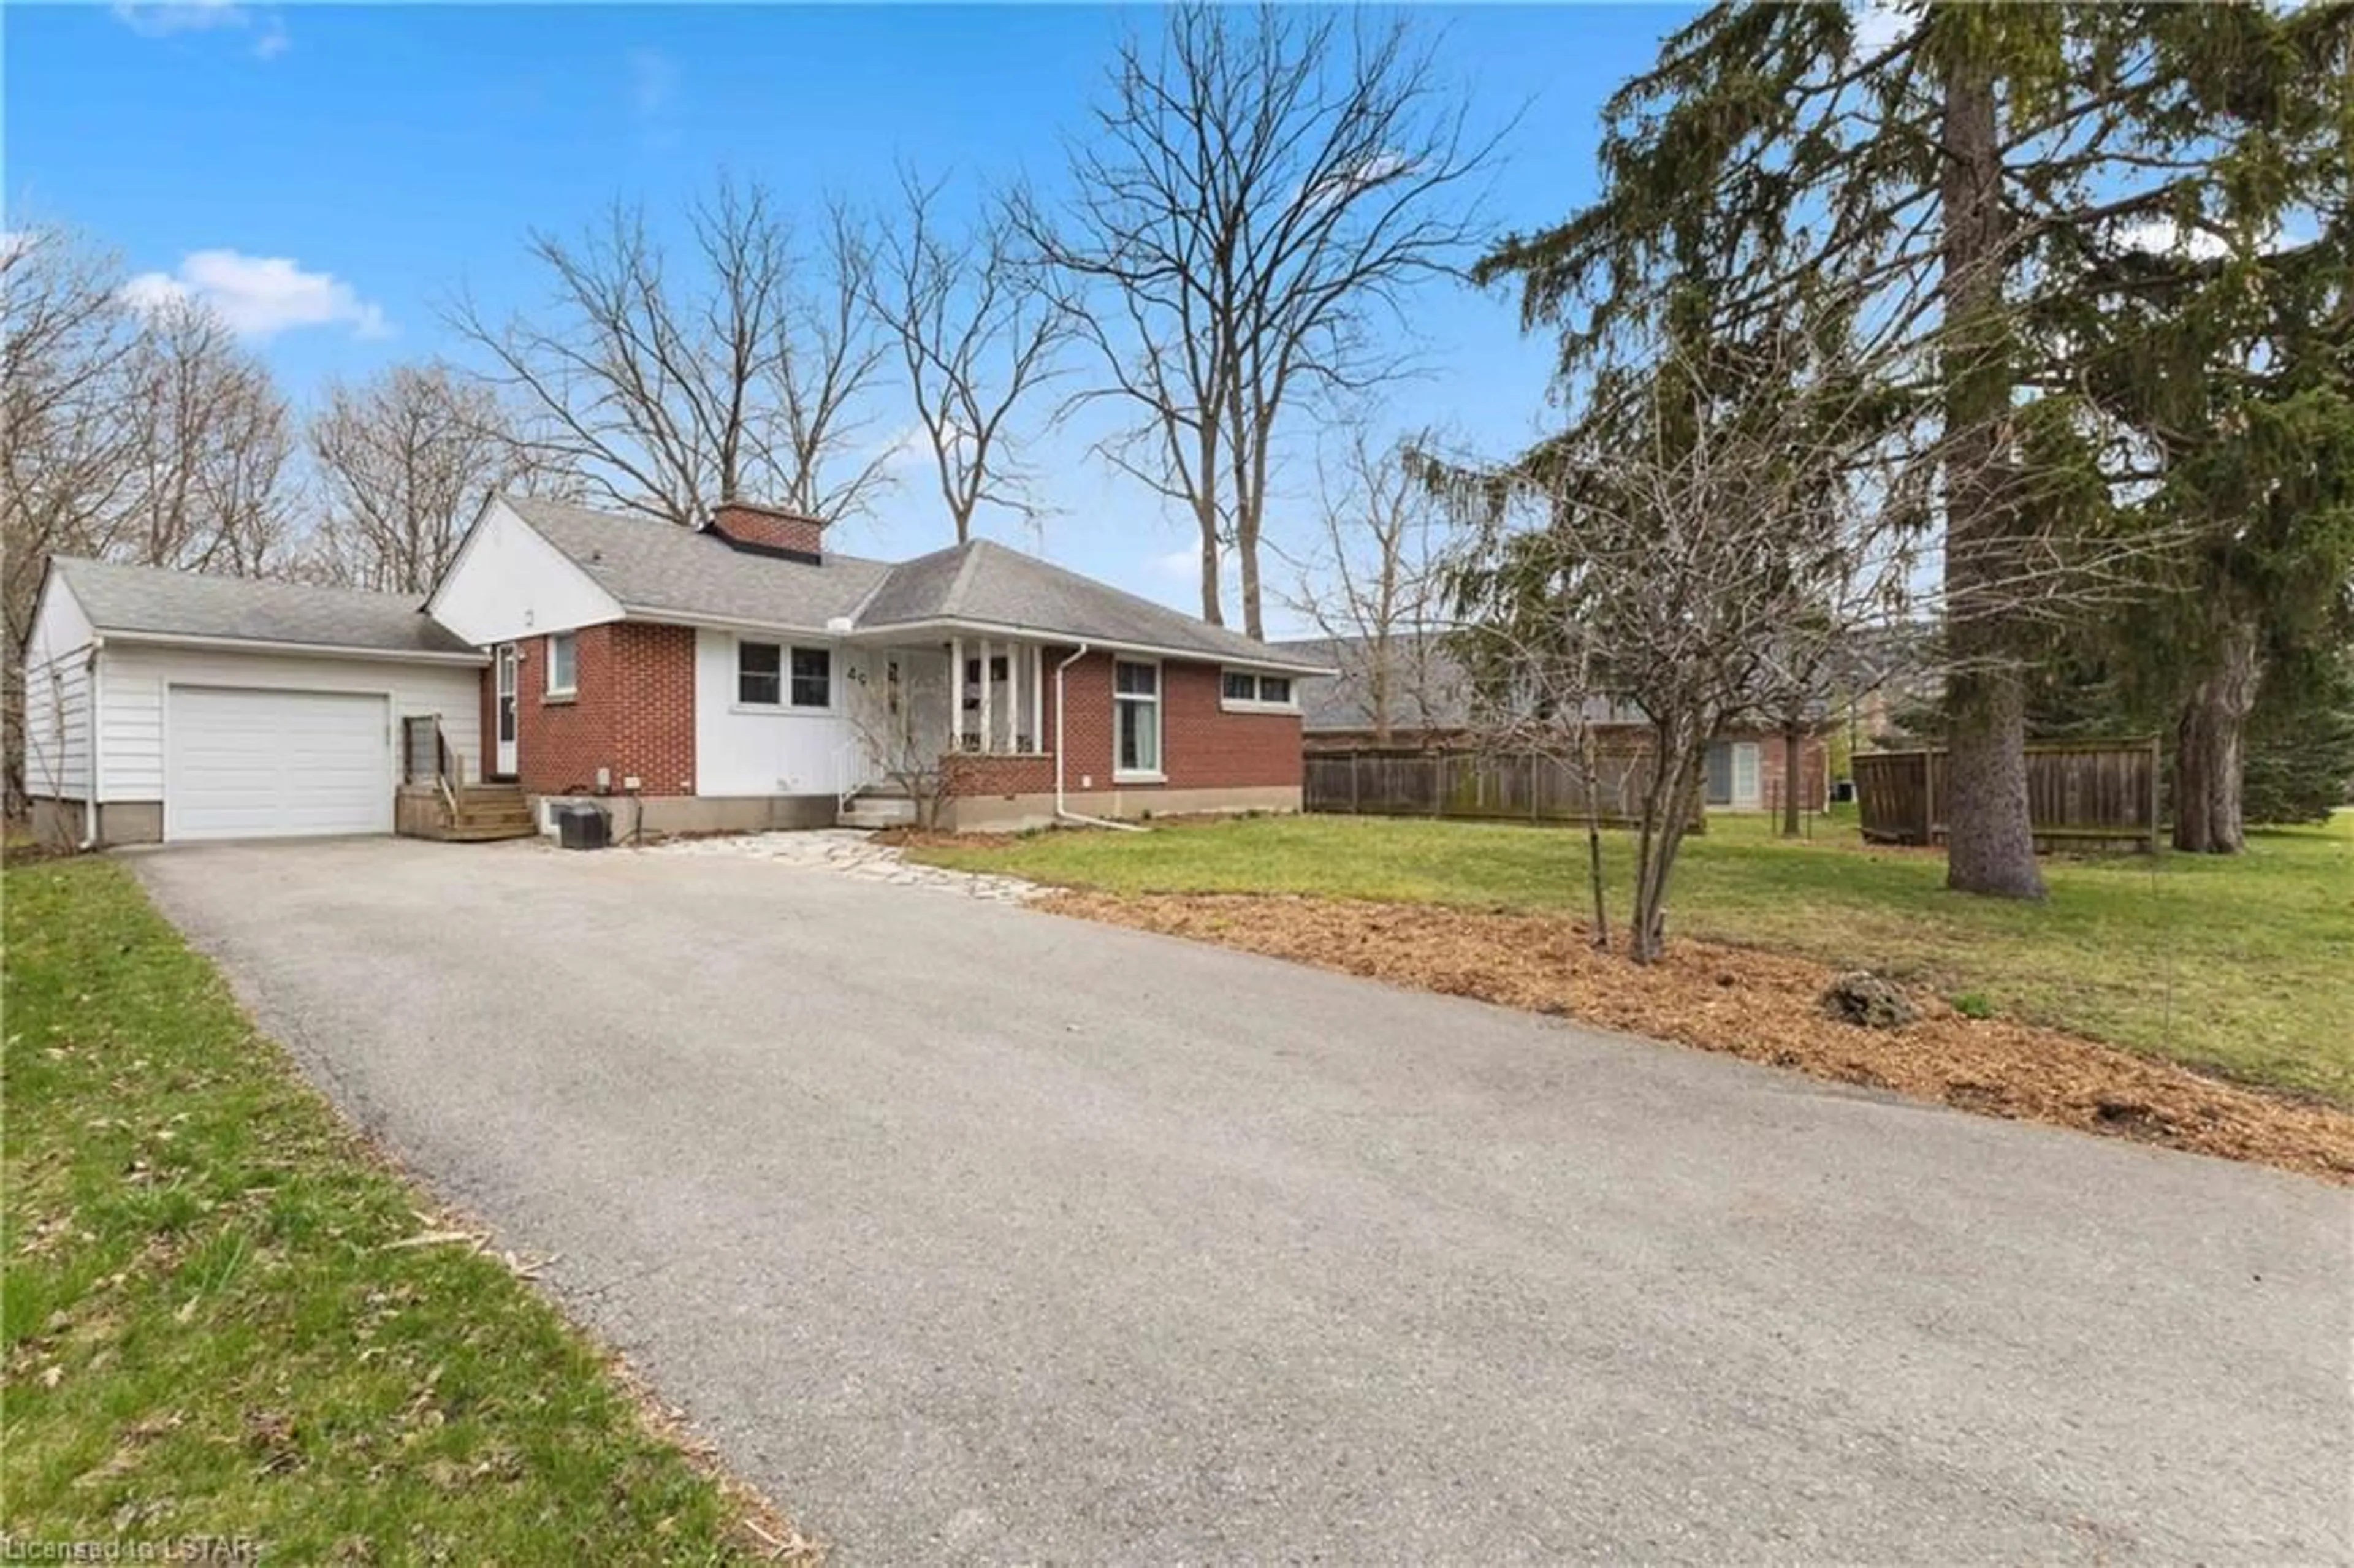 Frontside or backside of a home for 49 Woodward Ave, London Ontario N6H 2E6